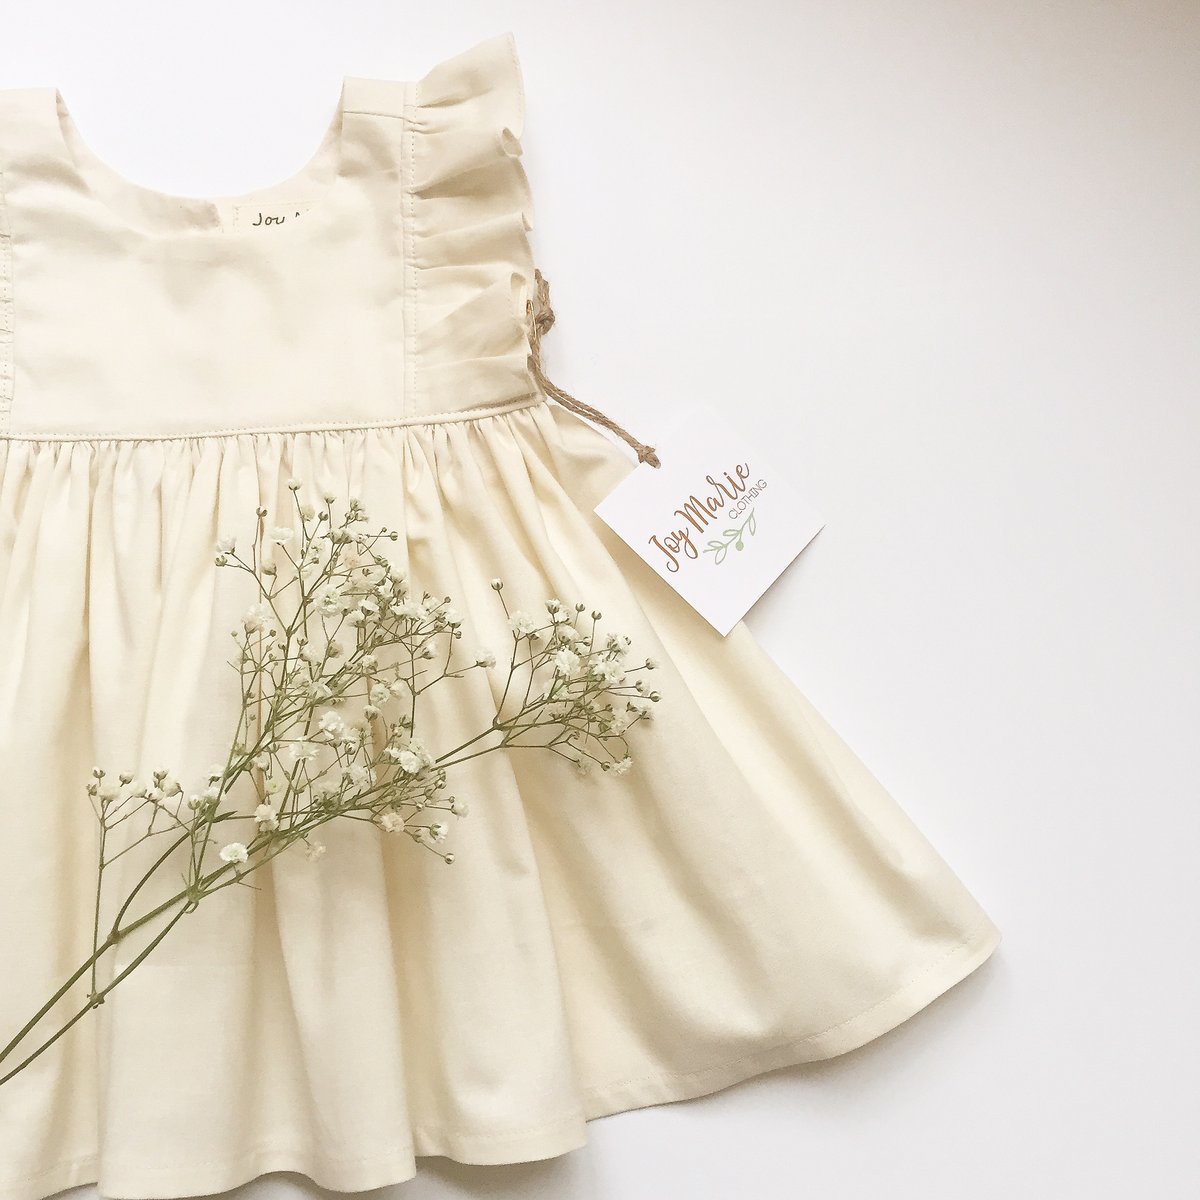 Image of The "Kelsey" dress in ivory